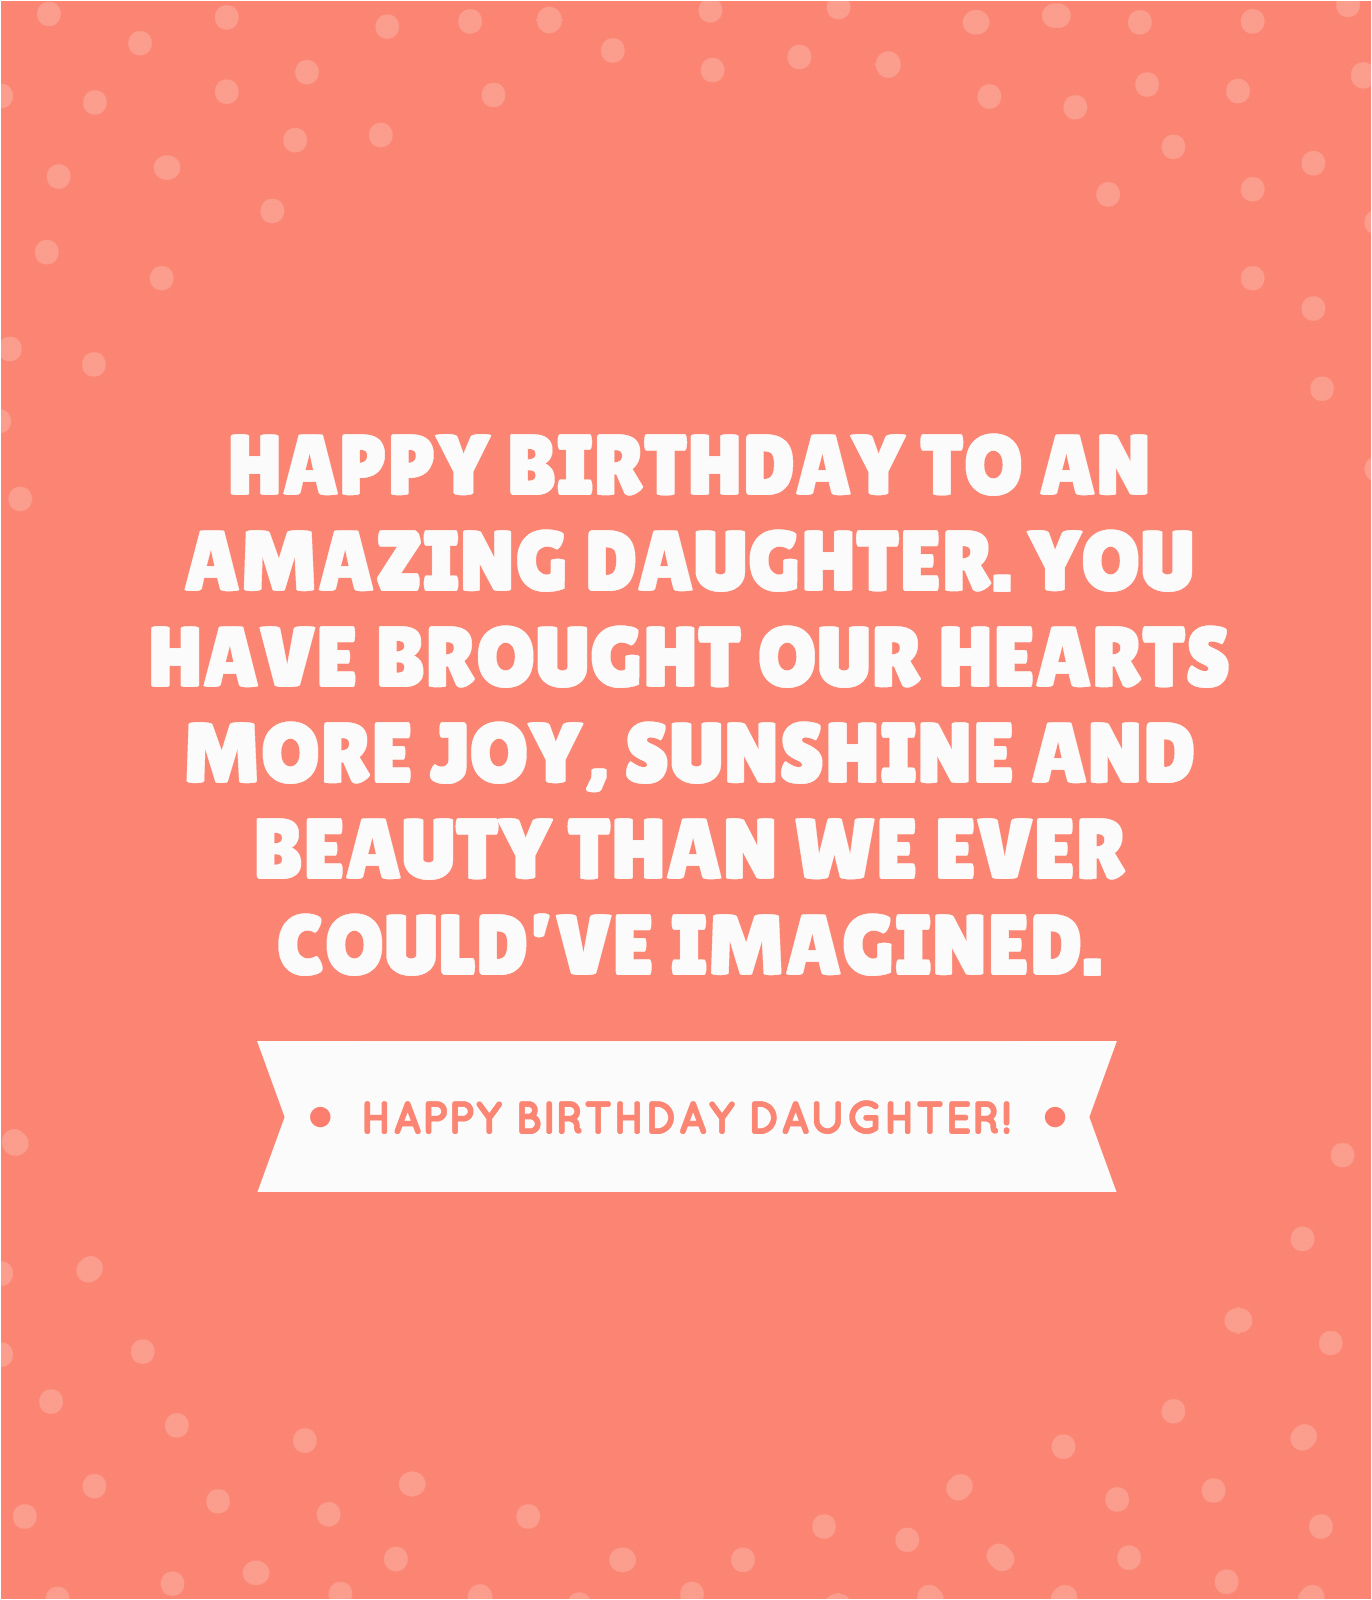 Quotes About Happy Birthday to My Daughter 35 Beautiful Ways to Say Happy Birthday Daughter Unique